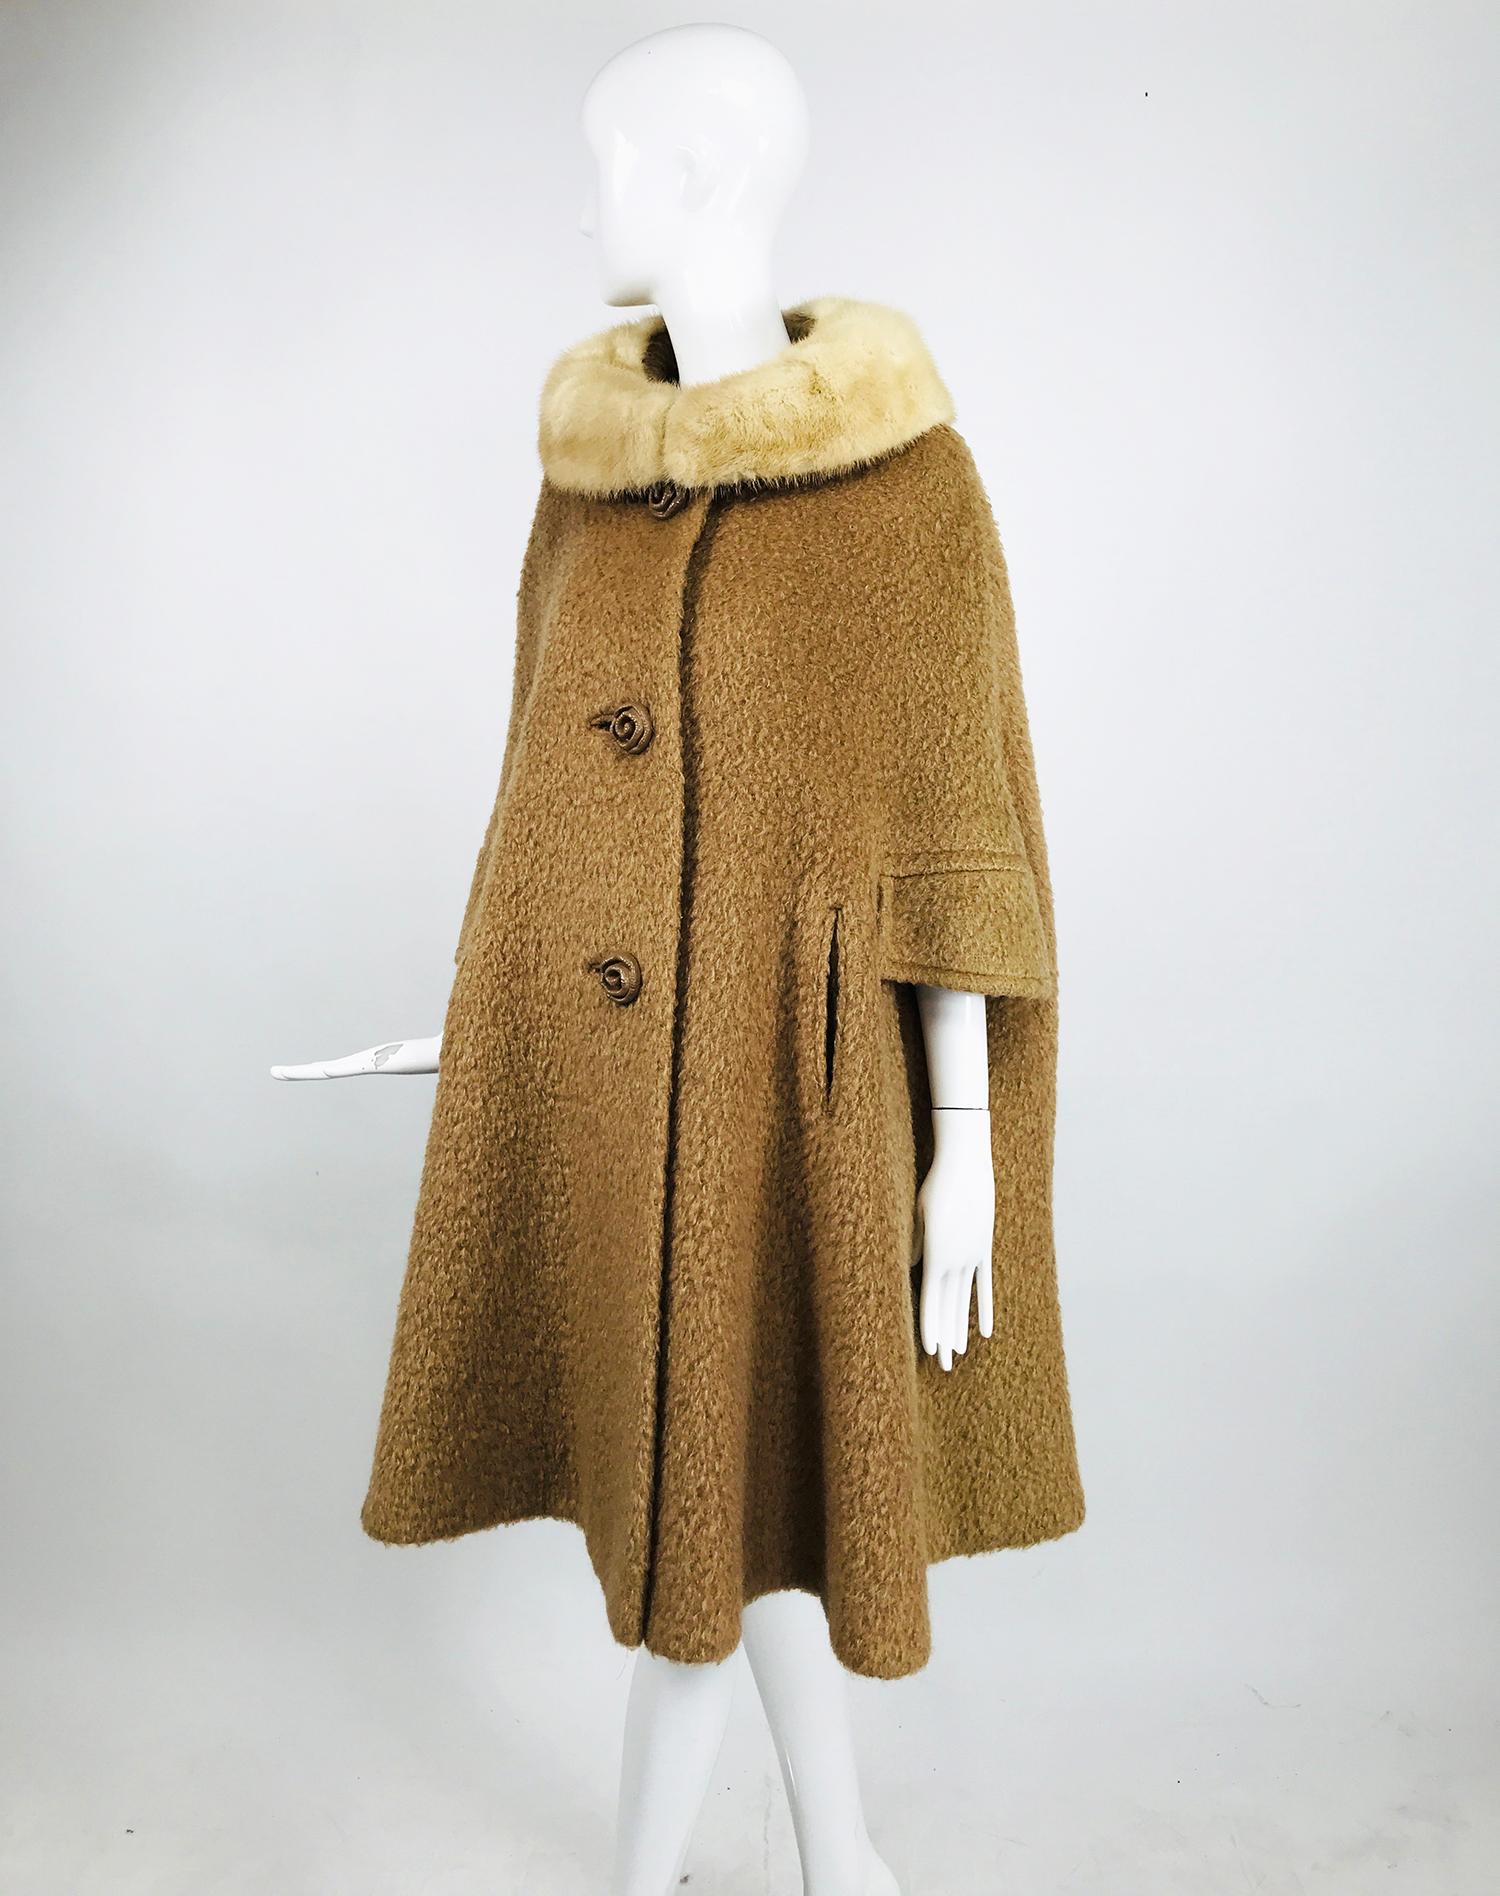 Vintage mohair cape coat with mink collar from the 1960s. Camel colour mohair wool cape has a shaped shoulder and A line shape. The cape closes at the front with 3 large rose shape buttons. There are flaps at each front side with openings below the